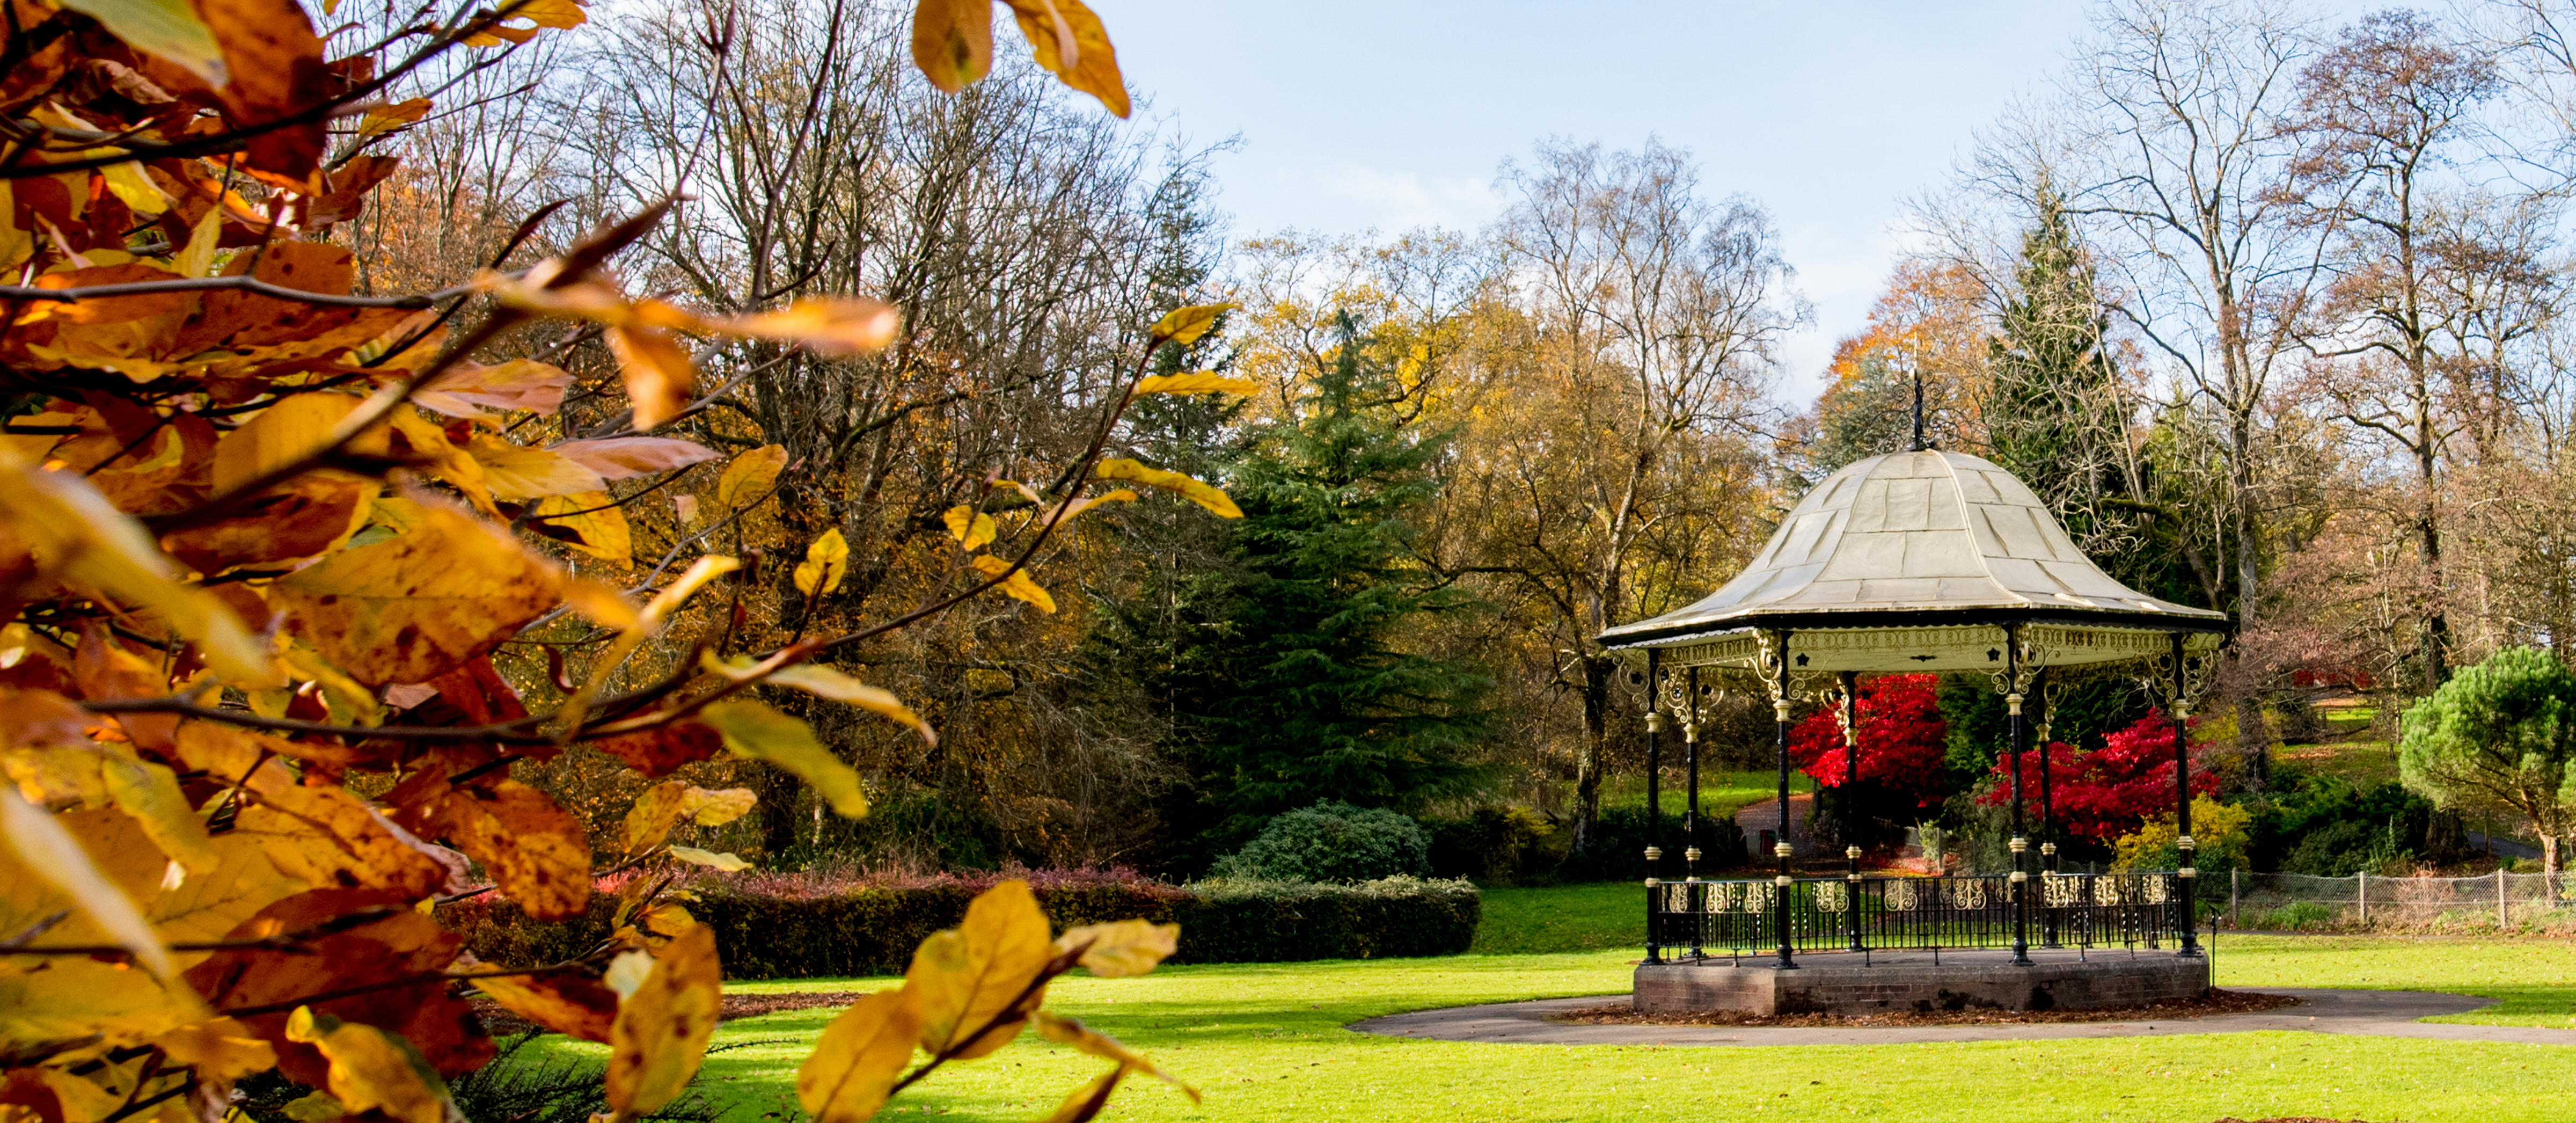 Aberdare Park - Autumn - Bandstand - Trees - Leaves-3